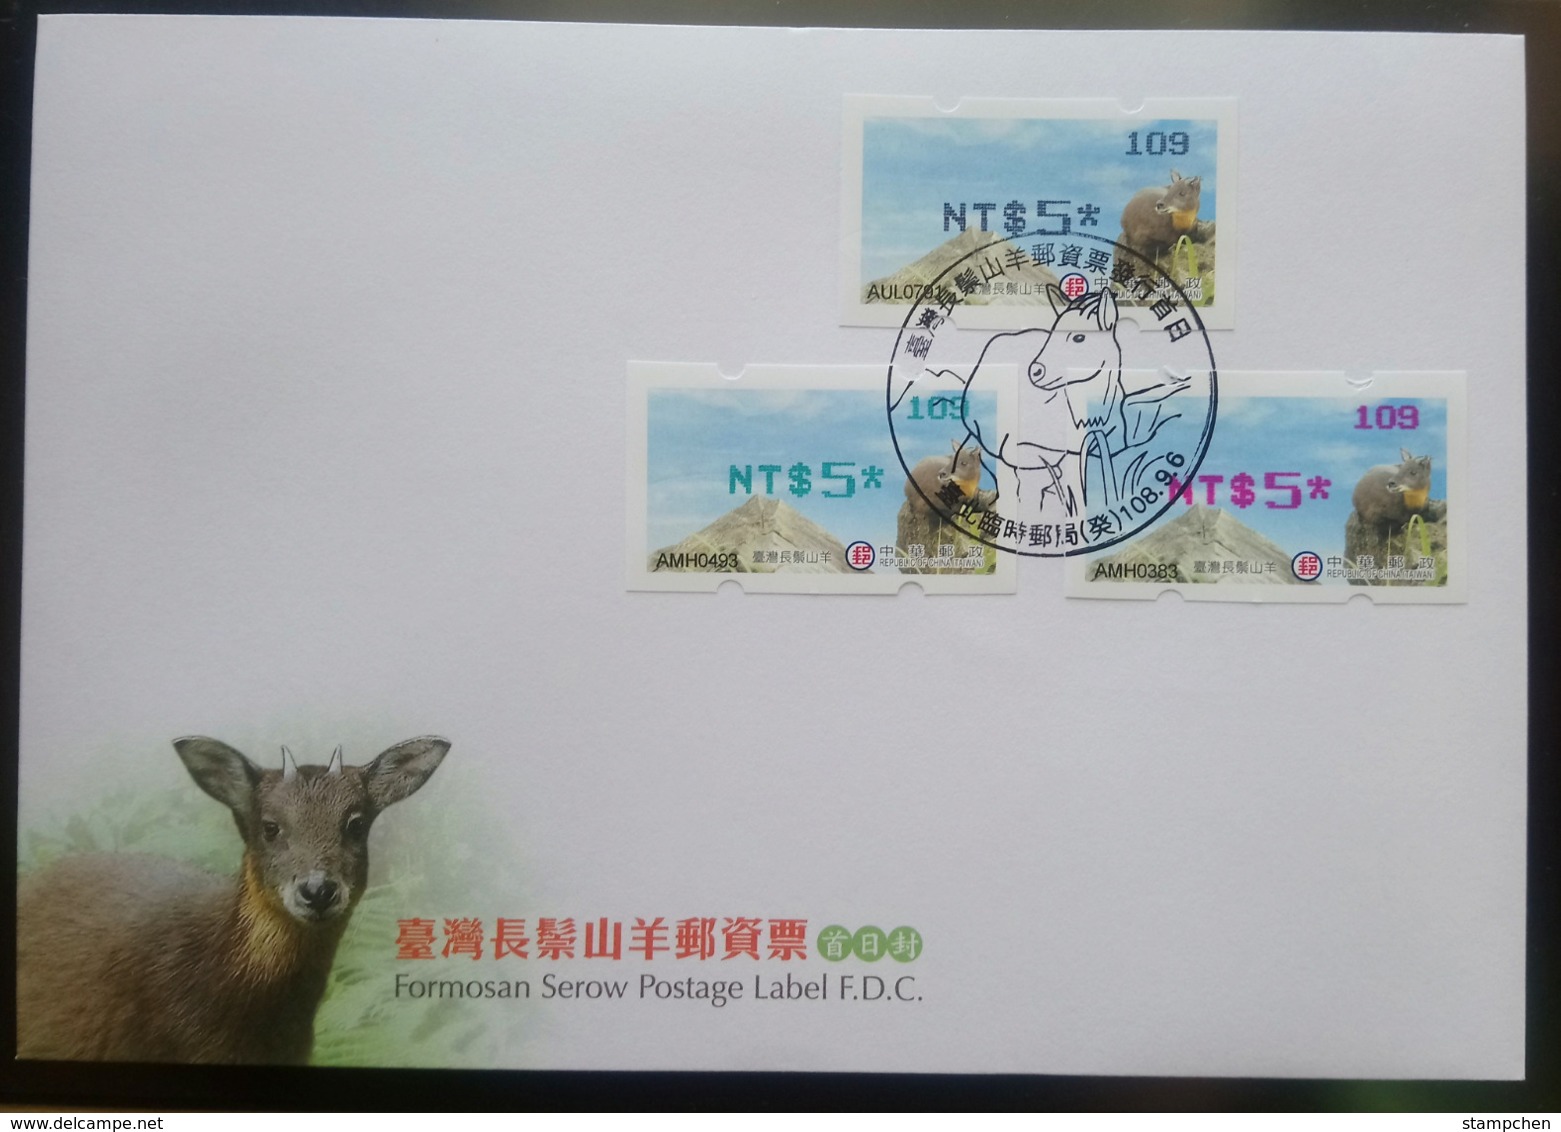 Black, Red & Green Imprint FDC Taiwan 2019 Formosan Serow ATM Frama Stamps  - Goat Mount Unusual - FDC